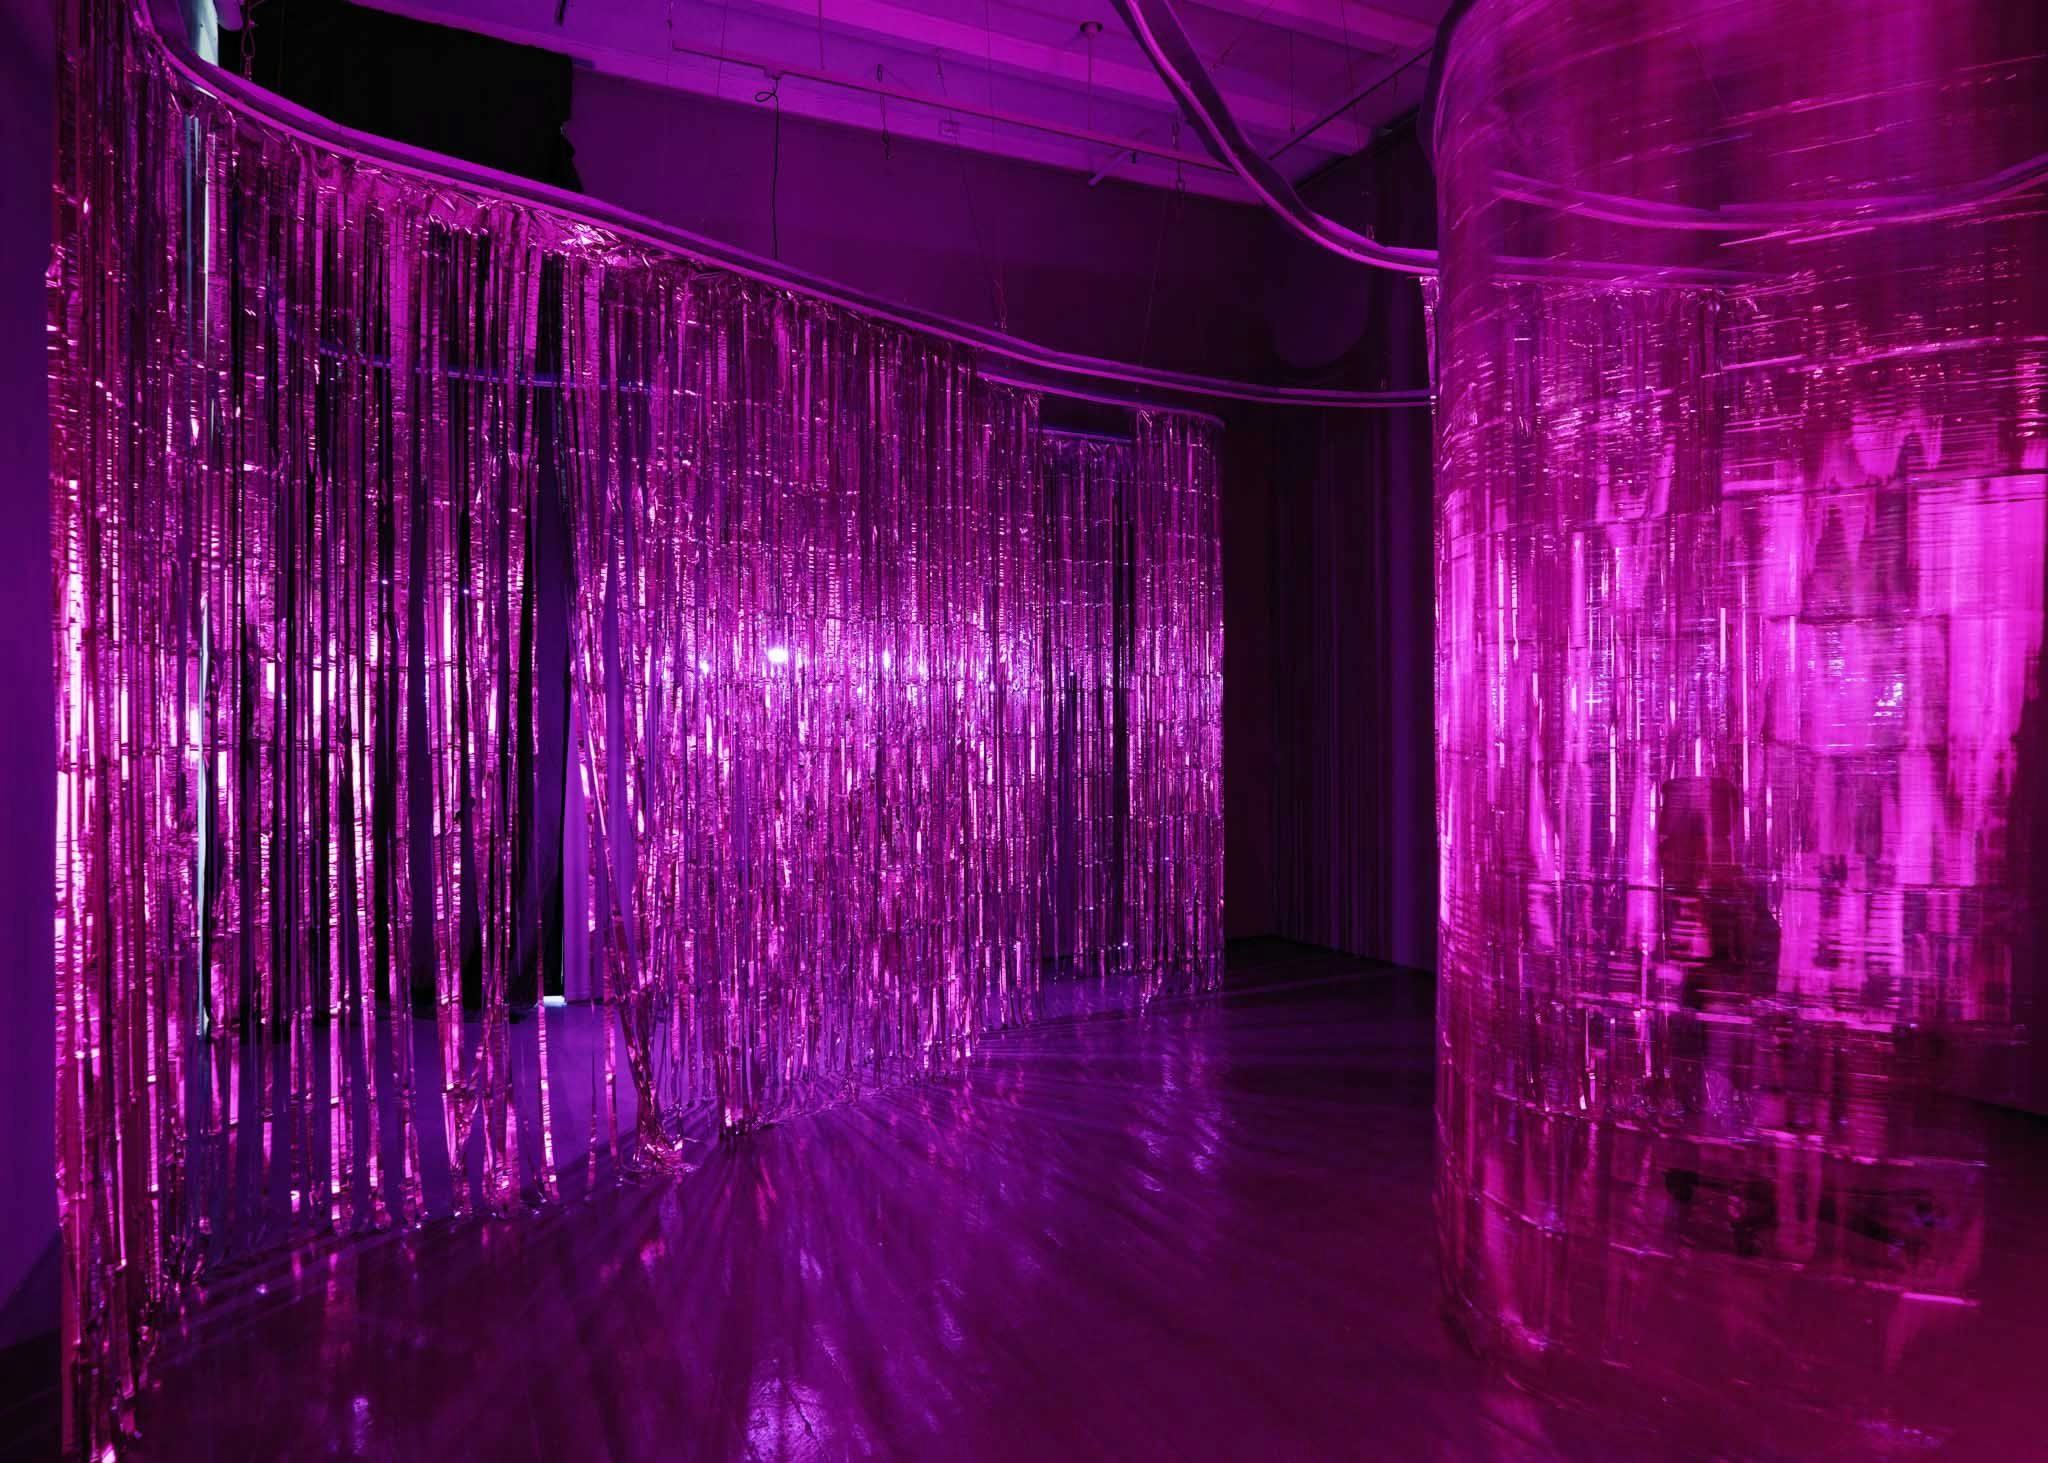 Foil curtains are caught in motion, highlighted by a fushcia light in a dark gallery